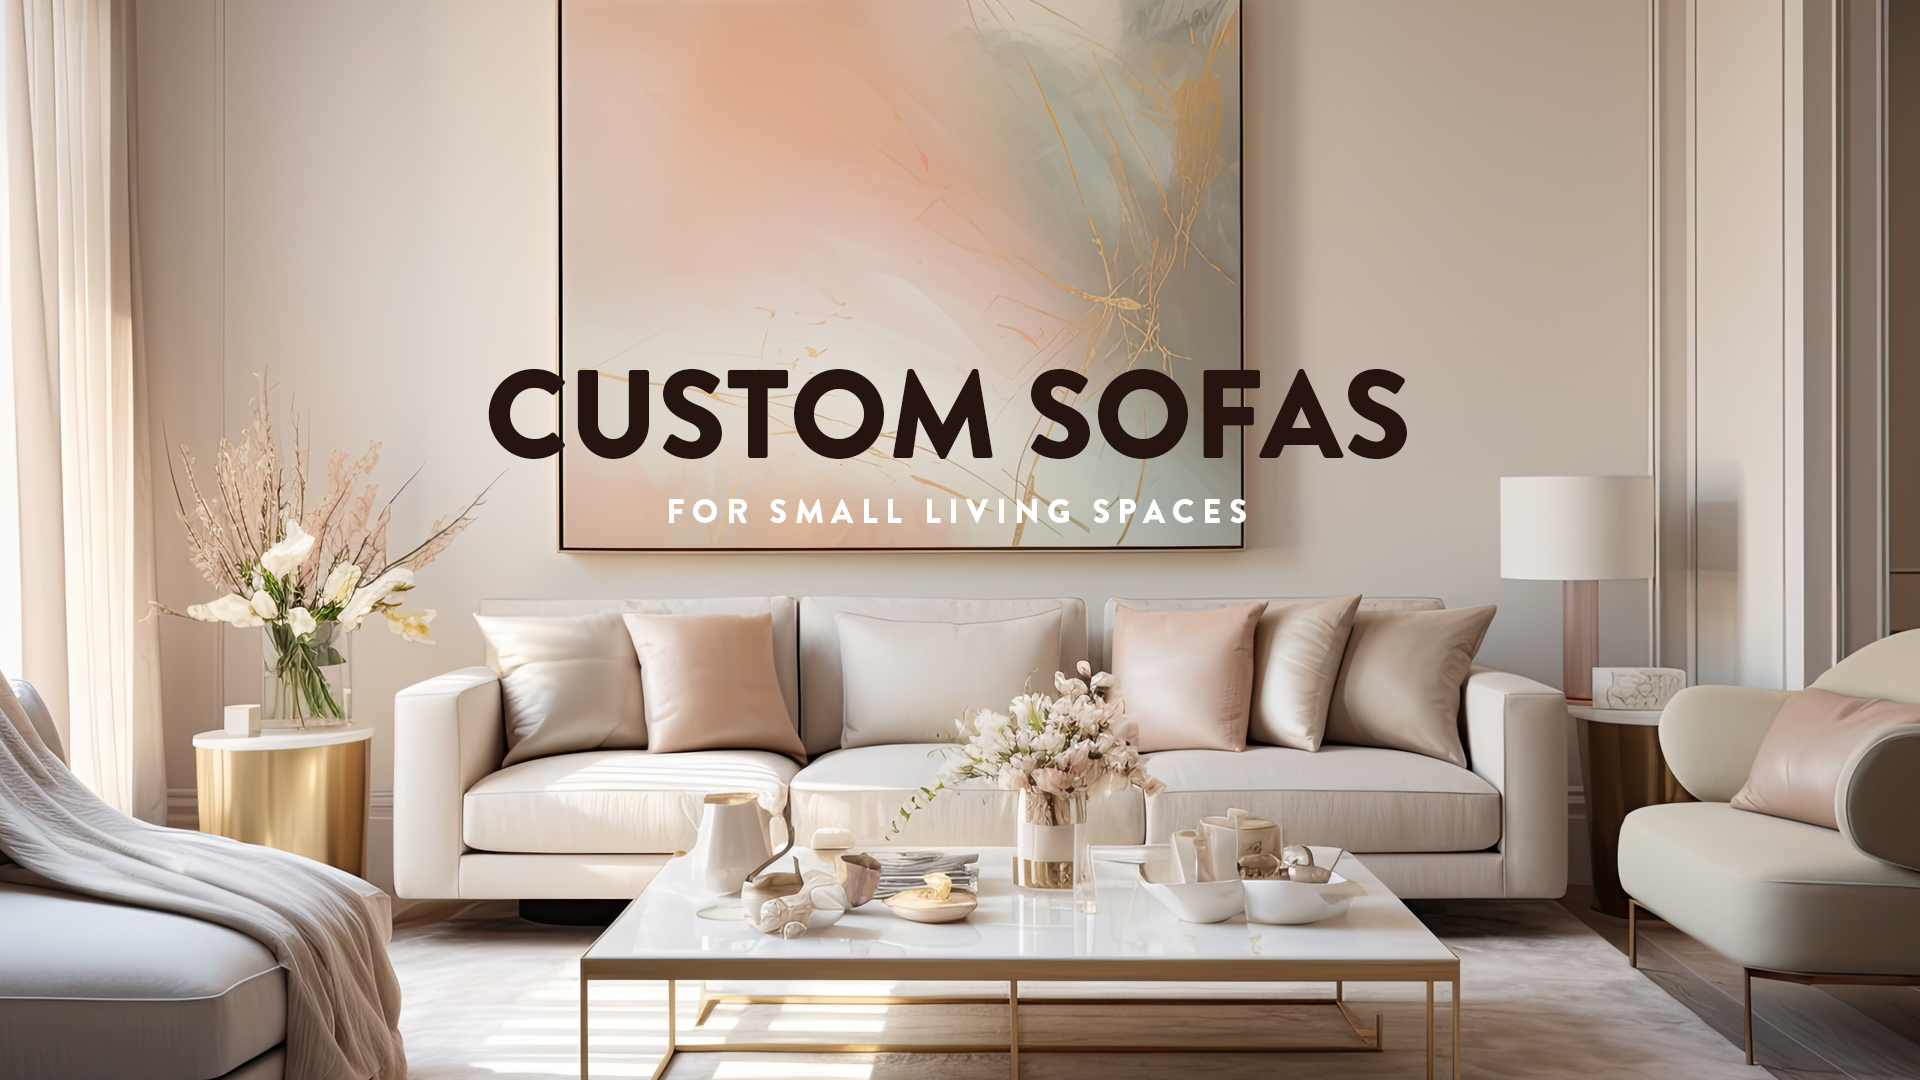 Custom Sofa Options for Small Living Spaces